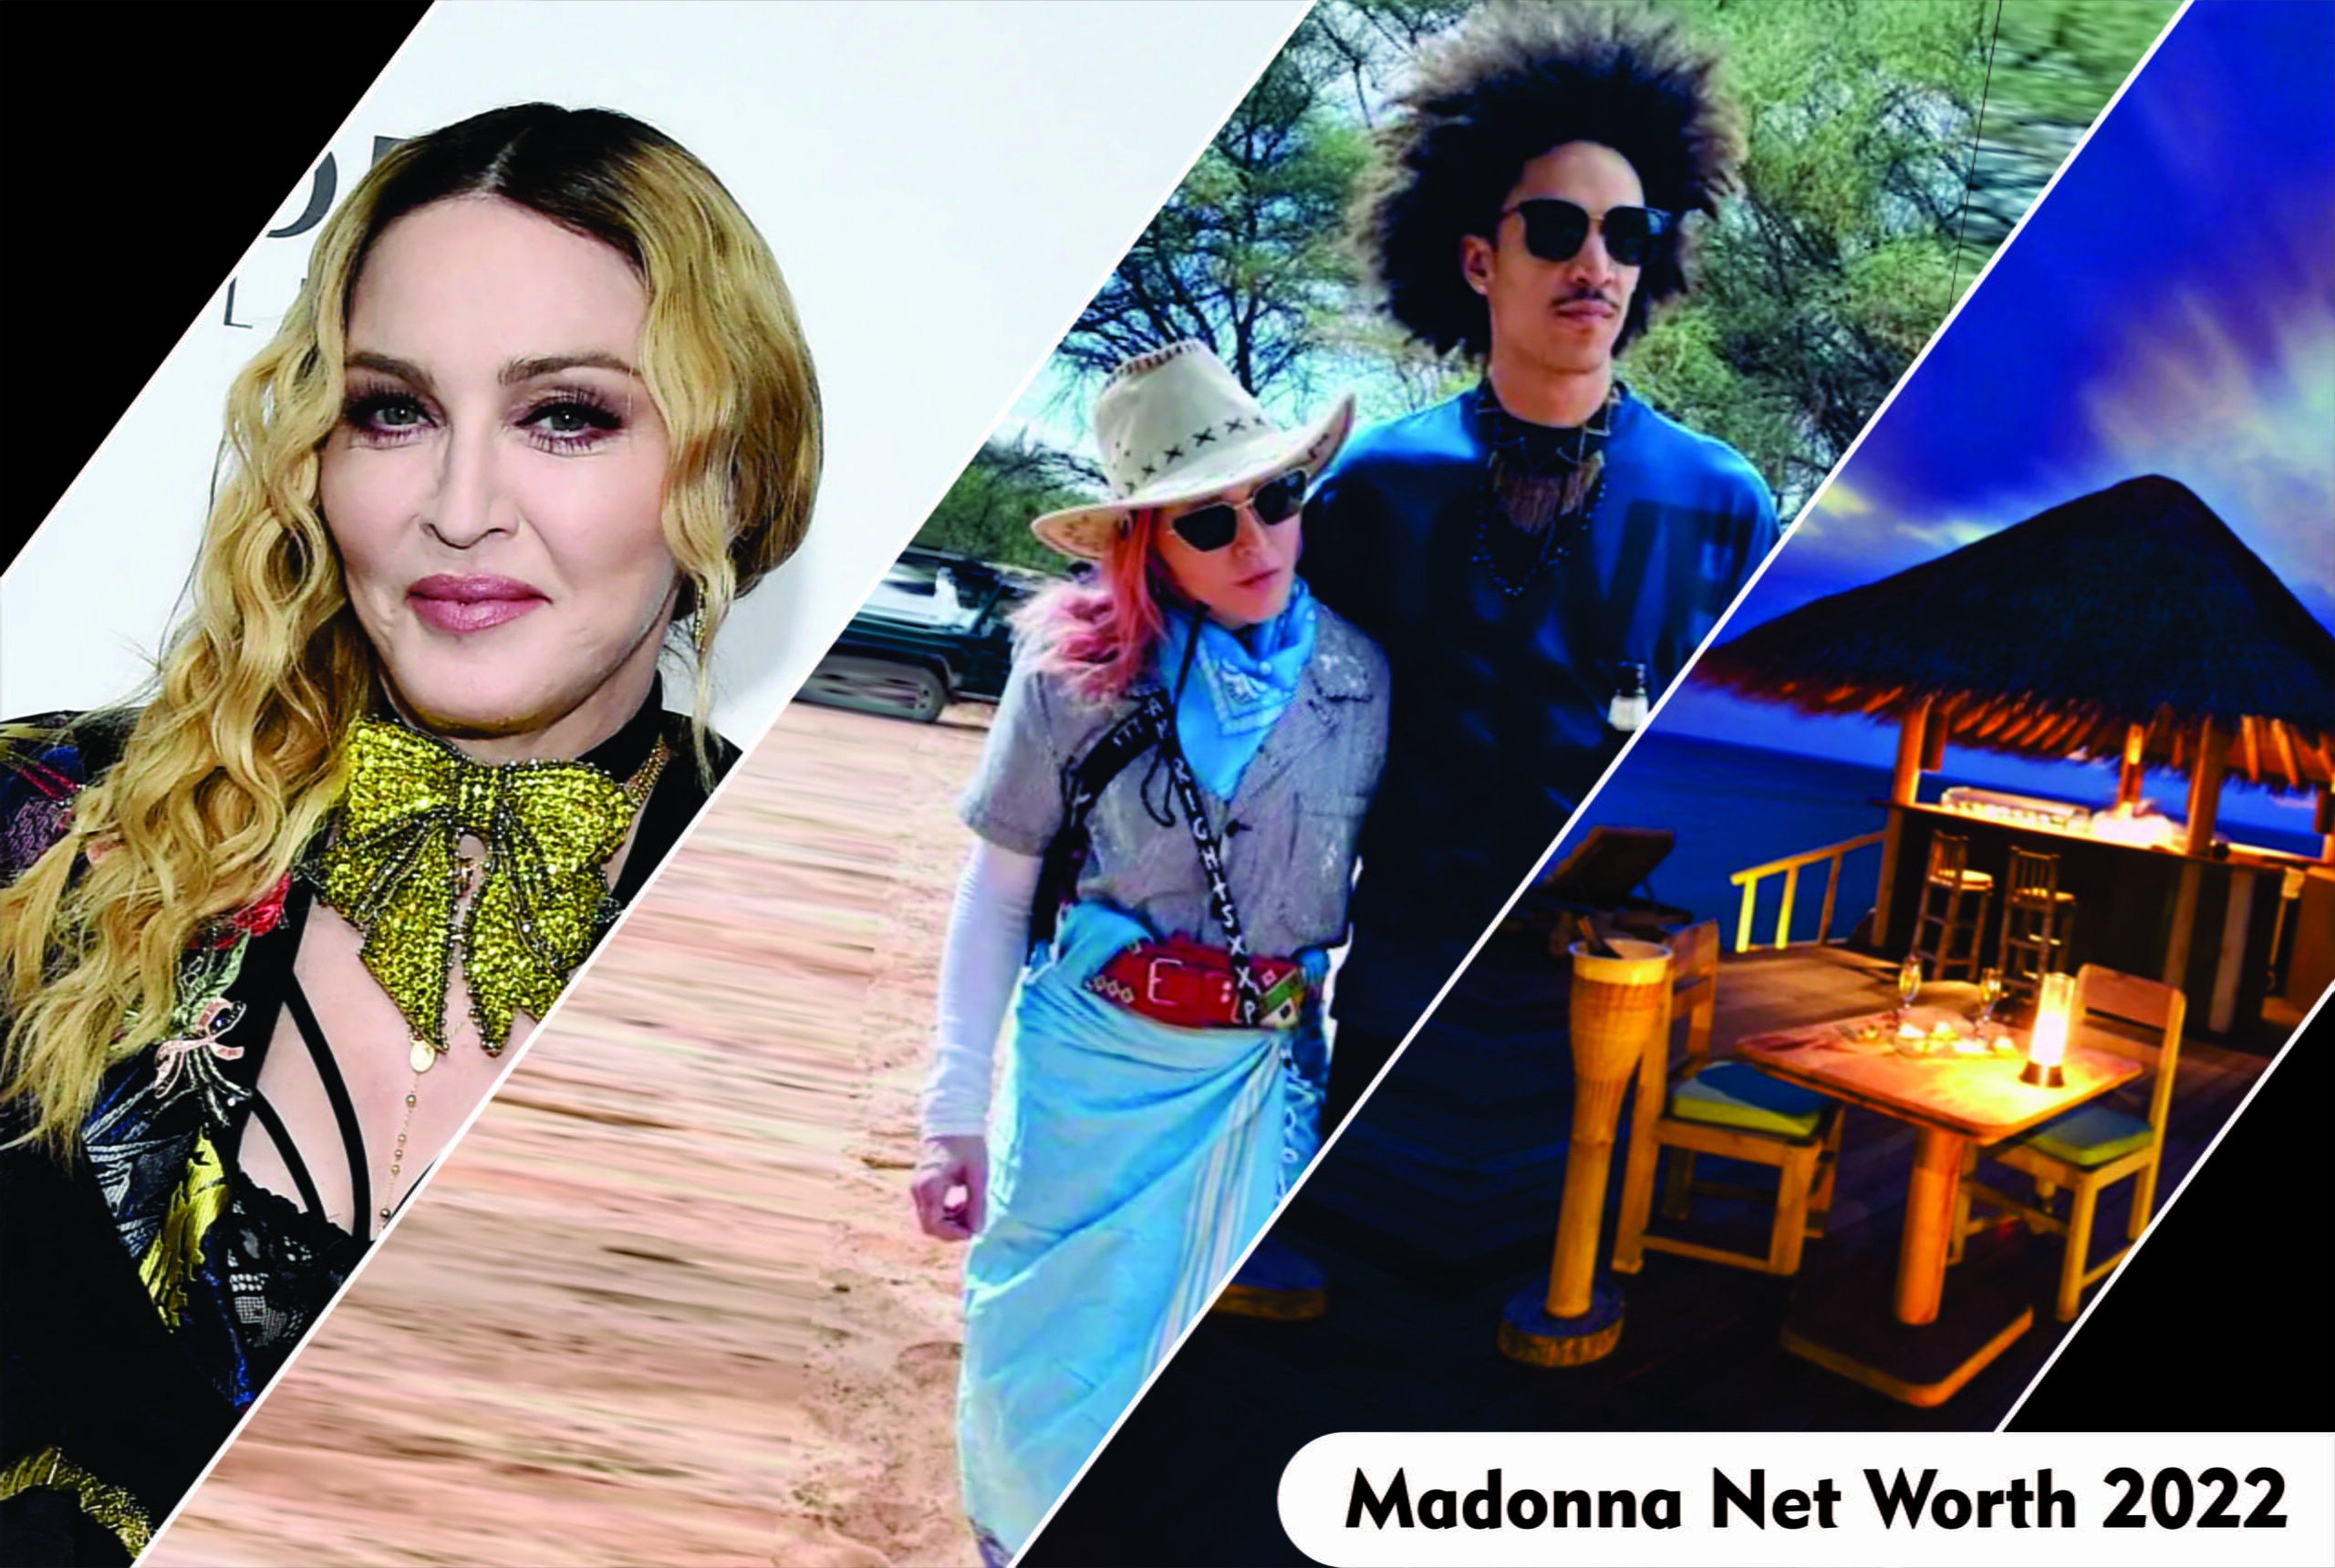 Madonna Net Worth, Concerts & Exclusive Facts (Updated 2022)